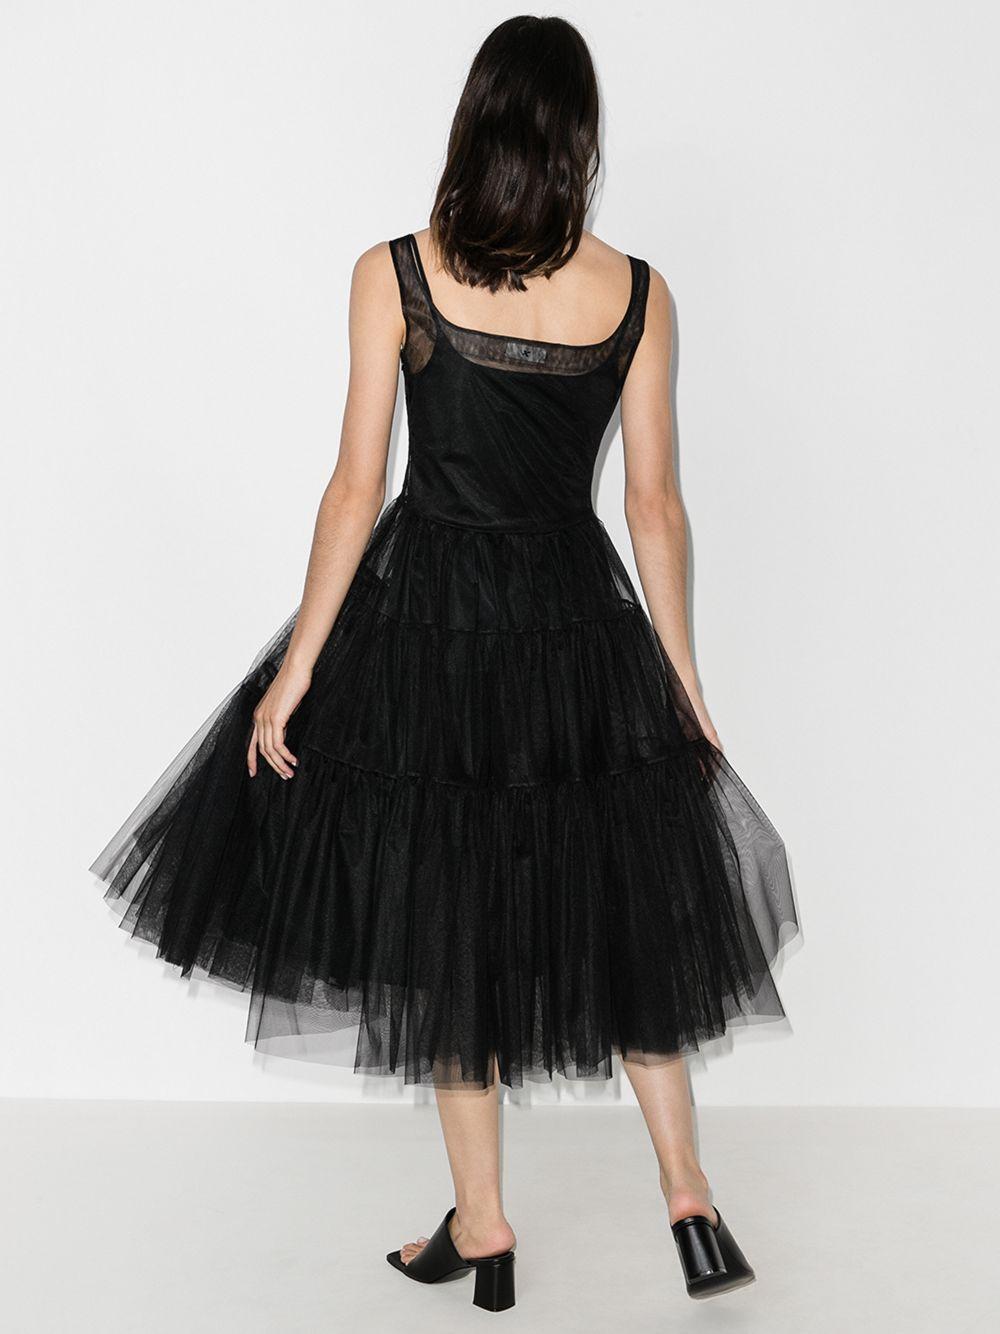 Molly Goddard Tiered Tulle Dress in Black - Lyst